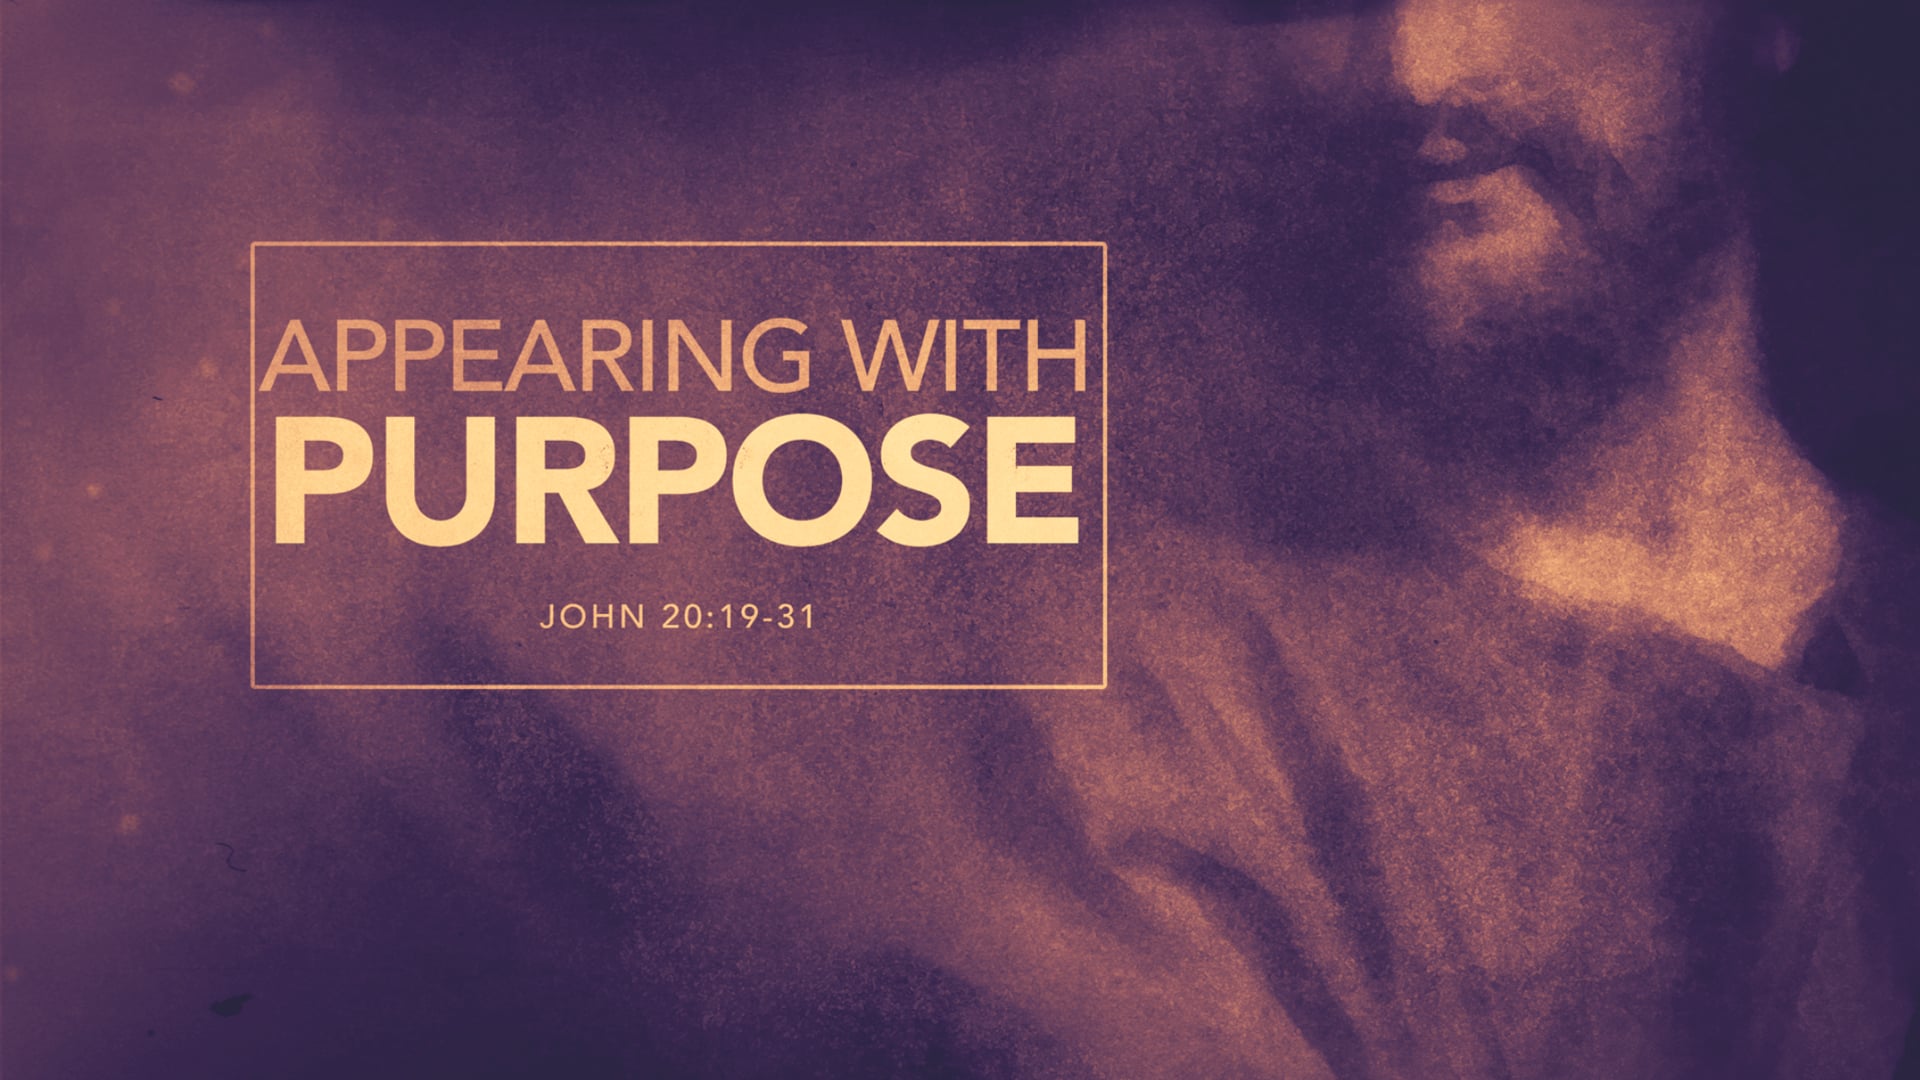 Appearing With Purpose (John 20:19-31)